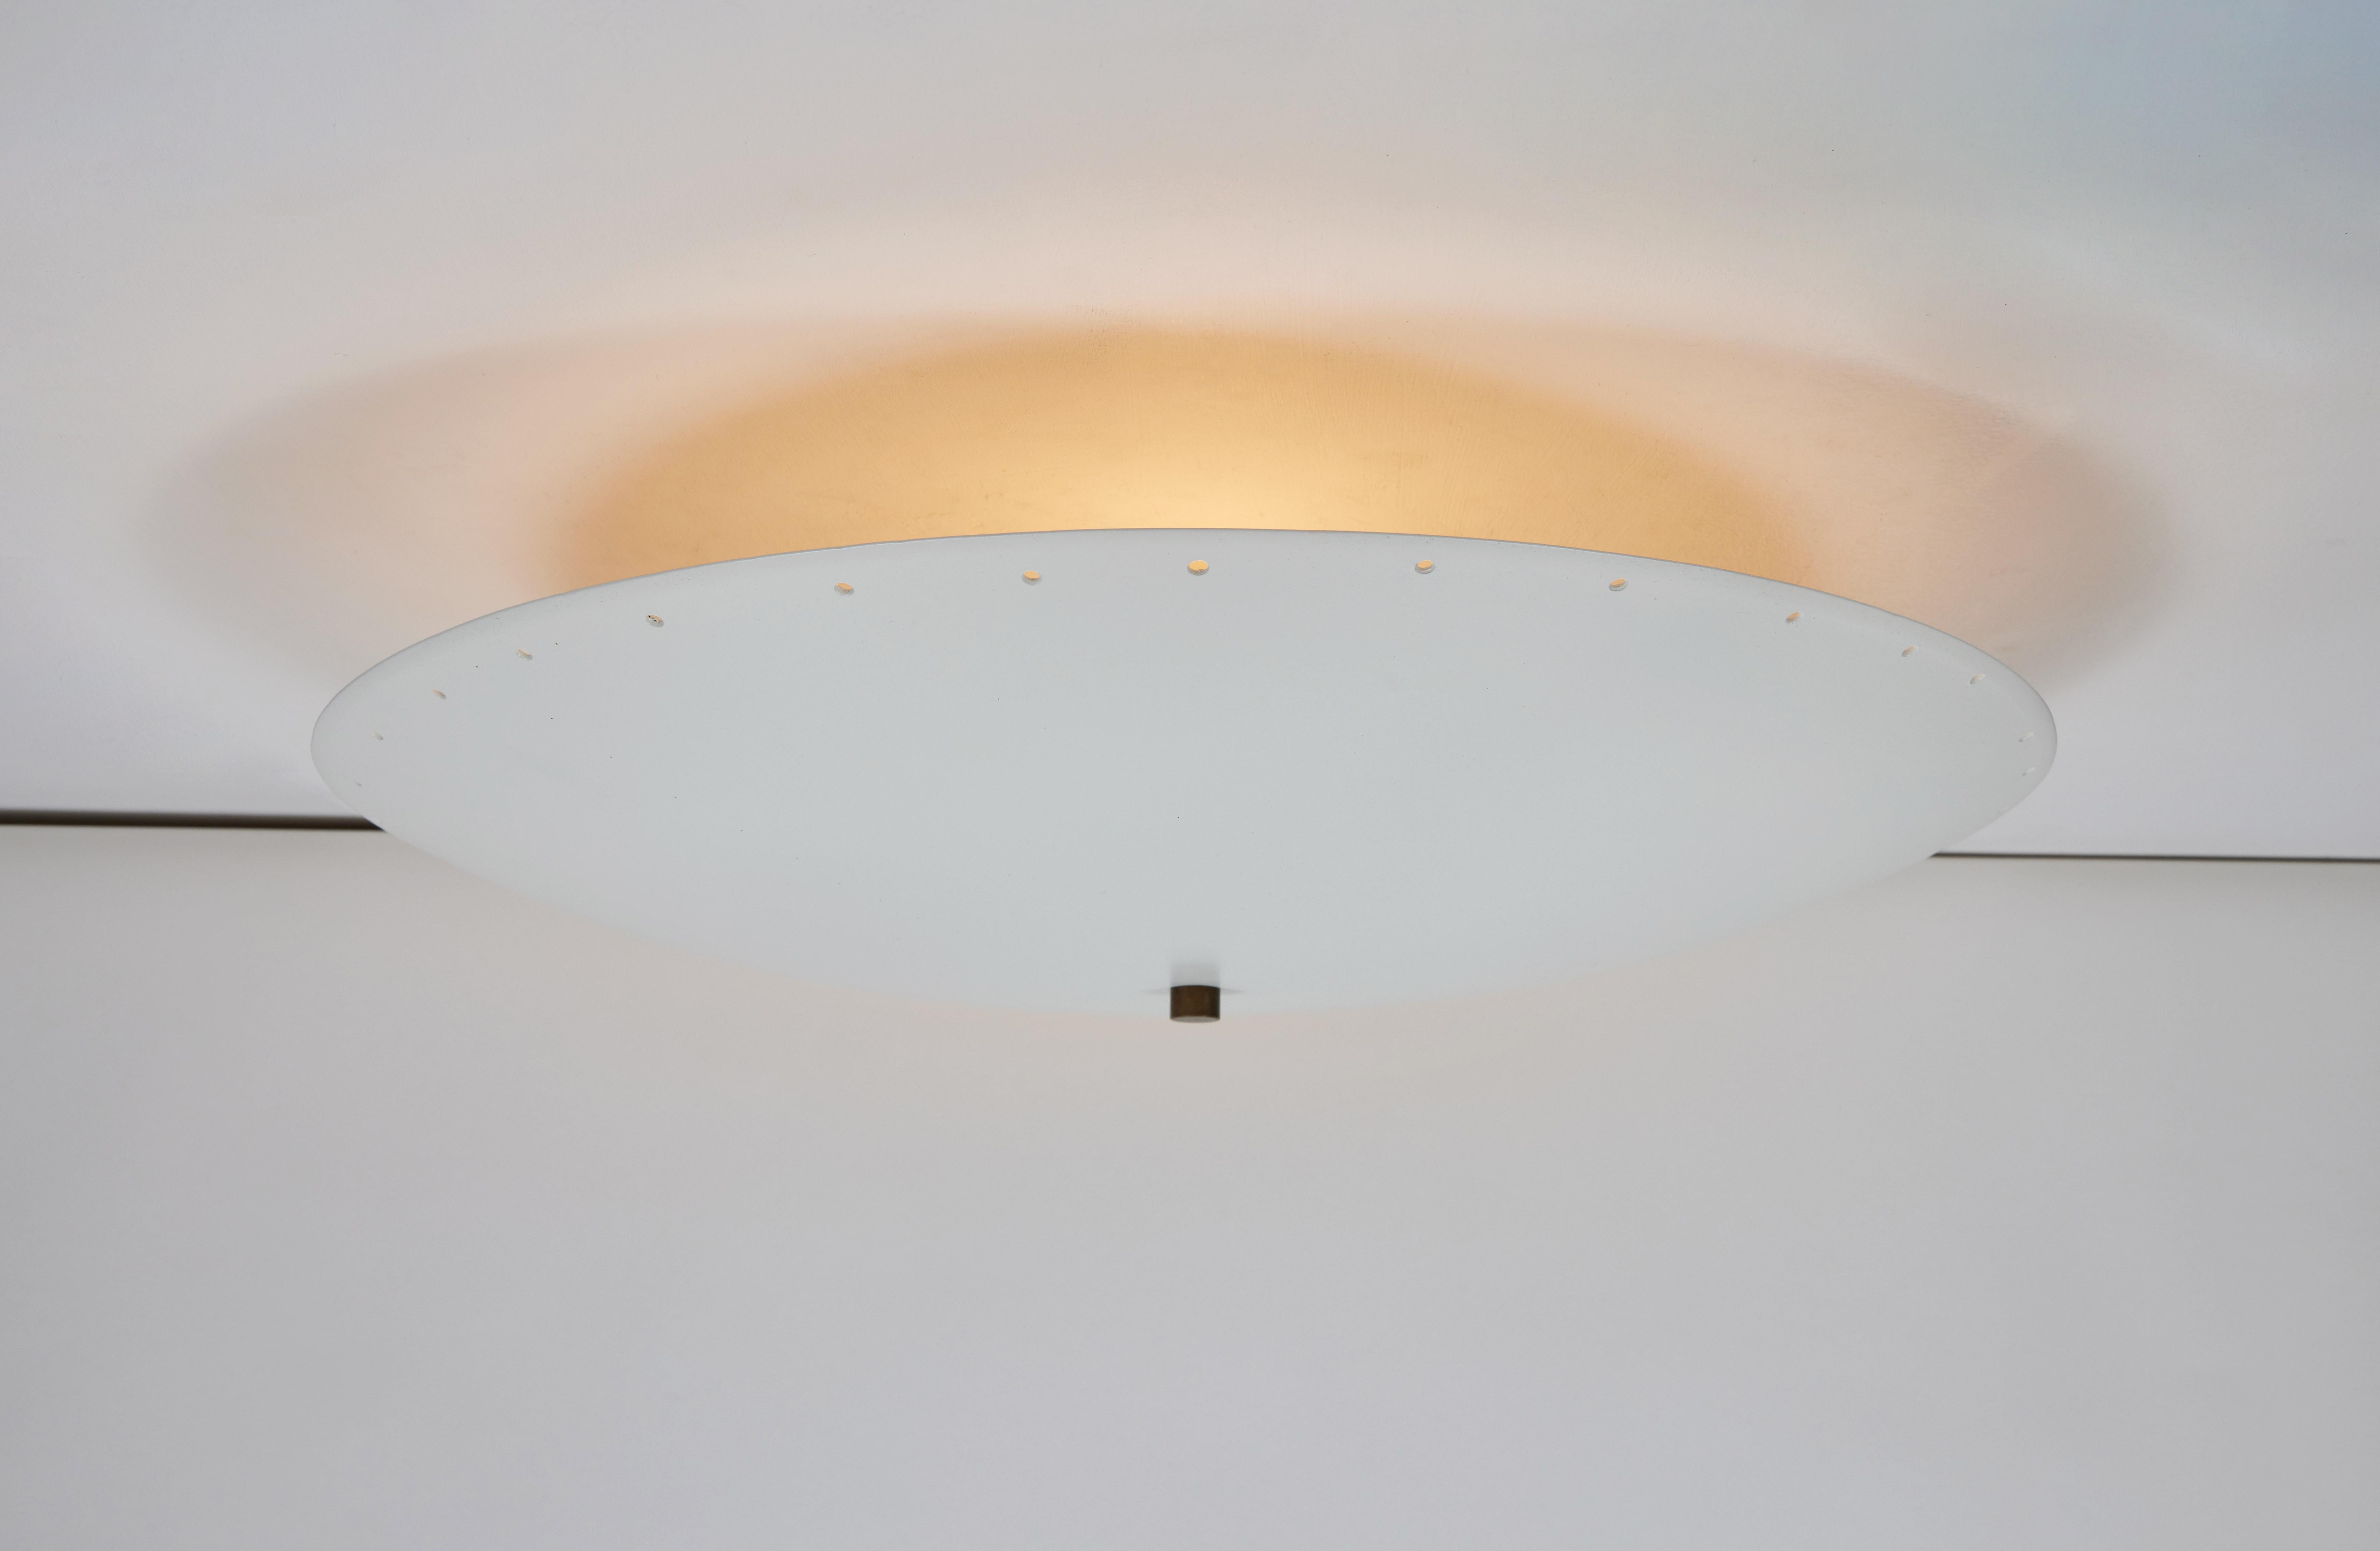 'Nina' perforated dome ceiling lamp in white by Alvaro Benitez.

Hand-fabricated by Los Angeles based designer and lighting professional Alvaro Benitez, these highly refined table lamps are reminiscent of the iconic midcentury Italian designs of